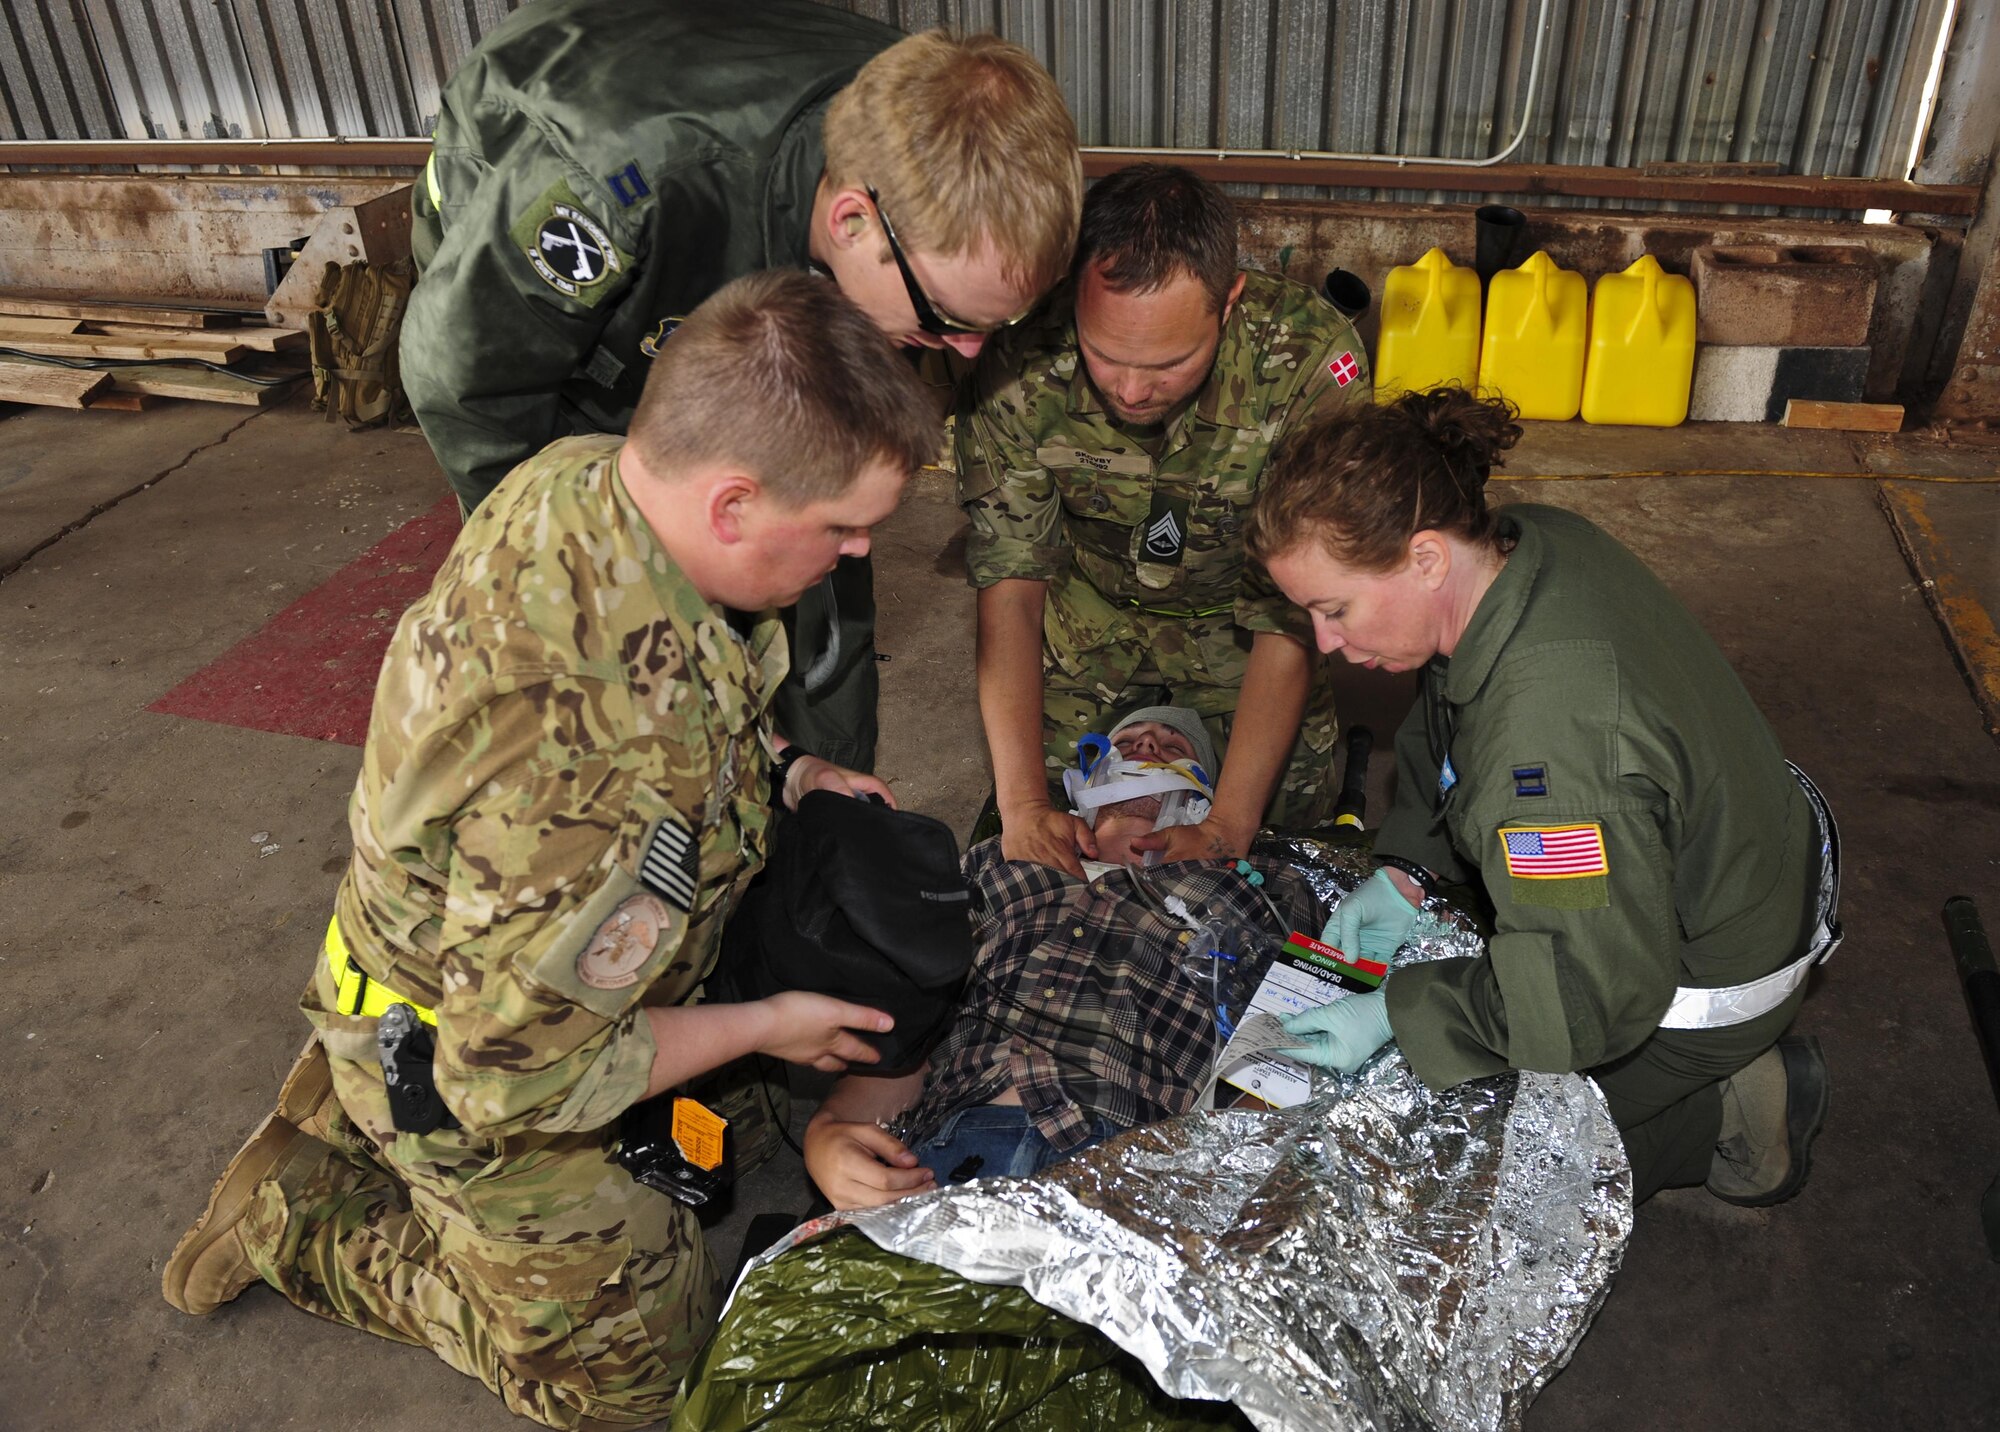 U.S. Air Force and Royal Danish air force medical personnel treat a simulated victim for neck and head injuries during an Angel Thunder 2015 mass casualty exercise at Winslow-Lindbergh Regional Airport, Ariz., June 5, 2015. Service members, University of Arizona and Northern Arizona University students acted as simulated patients to create a realistic experience during the exercise. (U.S. Air Force photo/Airman 1st Class Chris Drzazgowski)